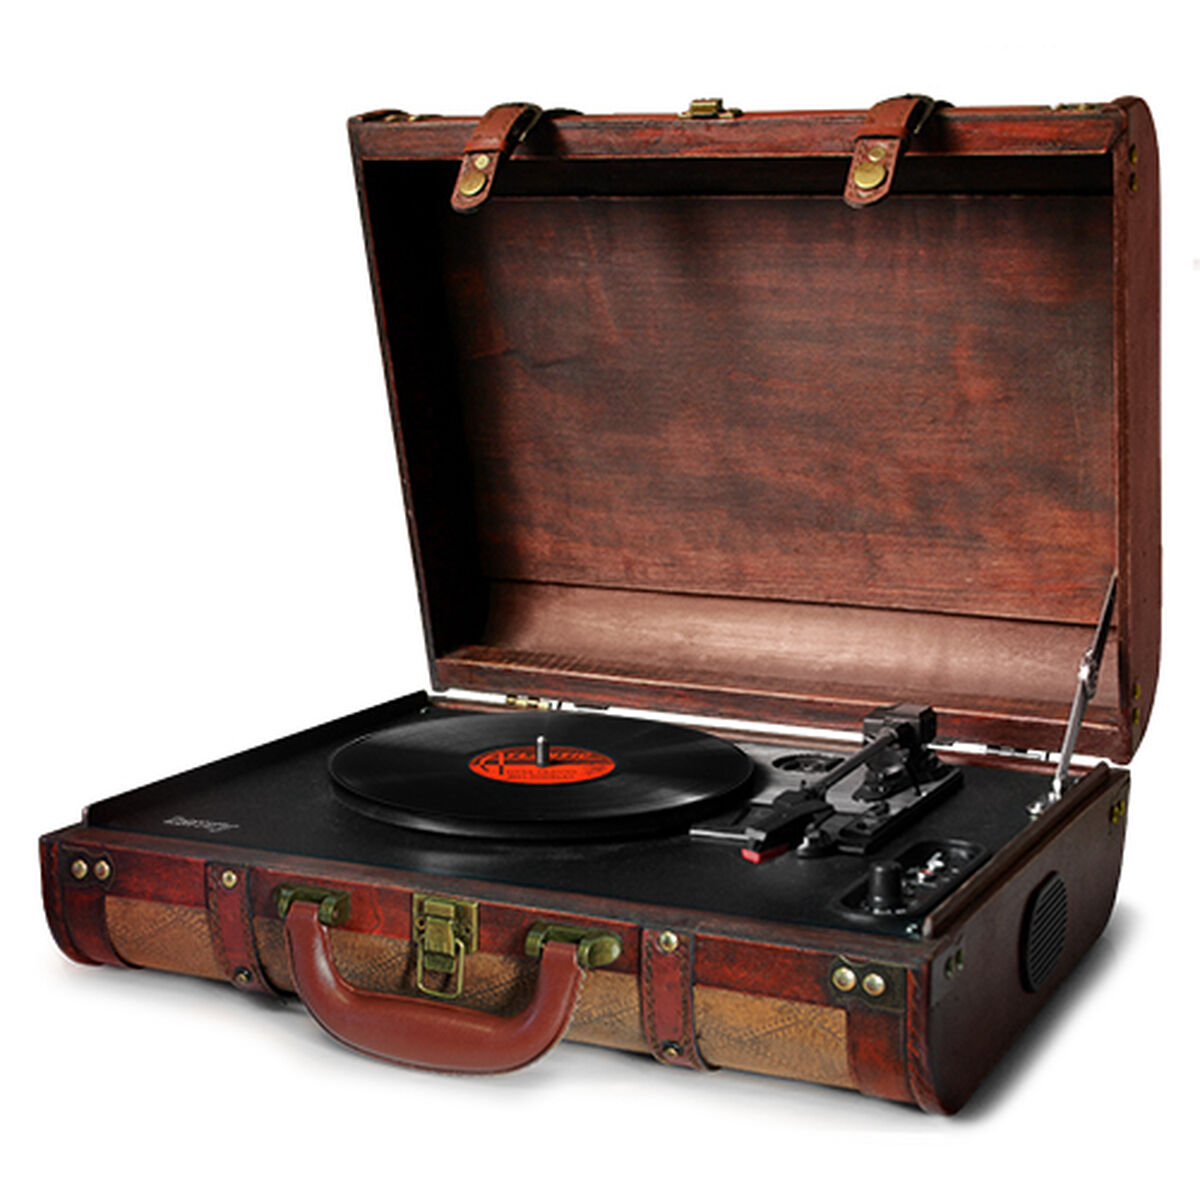 Record Player Camry CR 1149 Brown Black Bronze